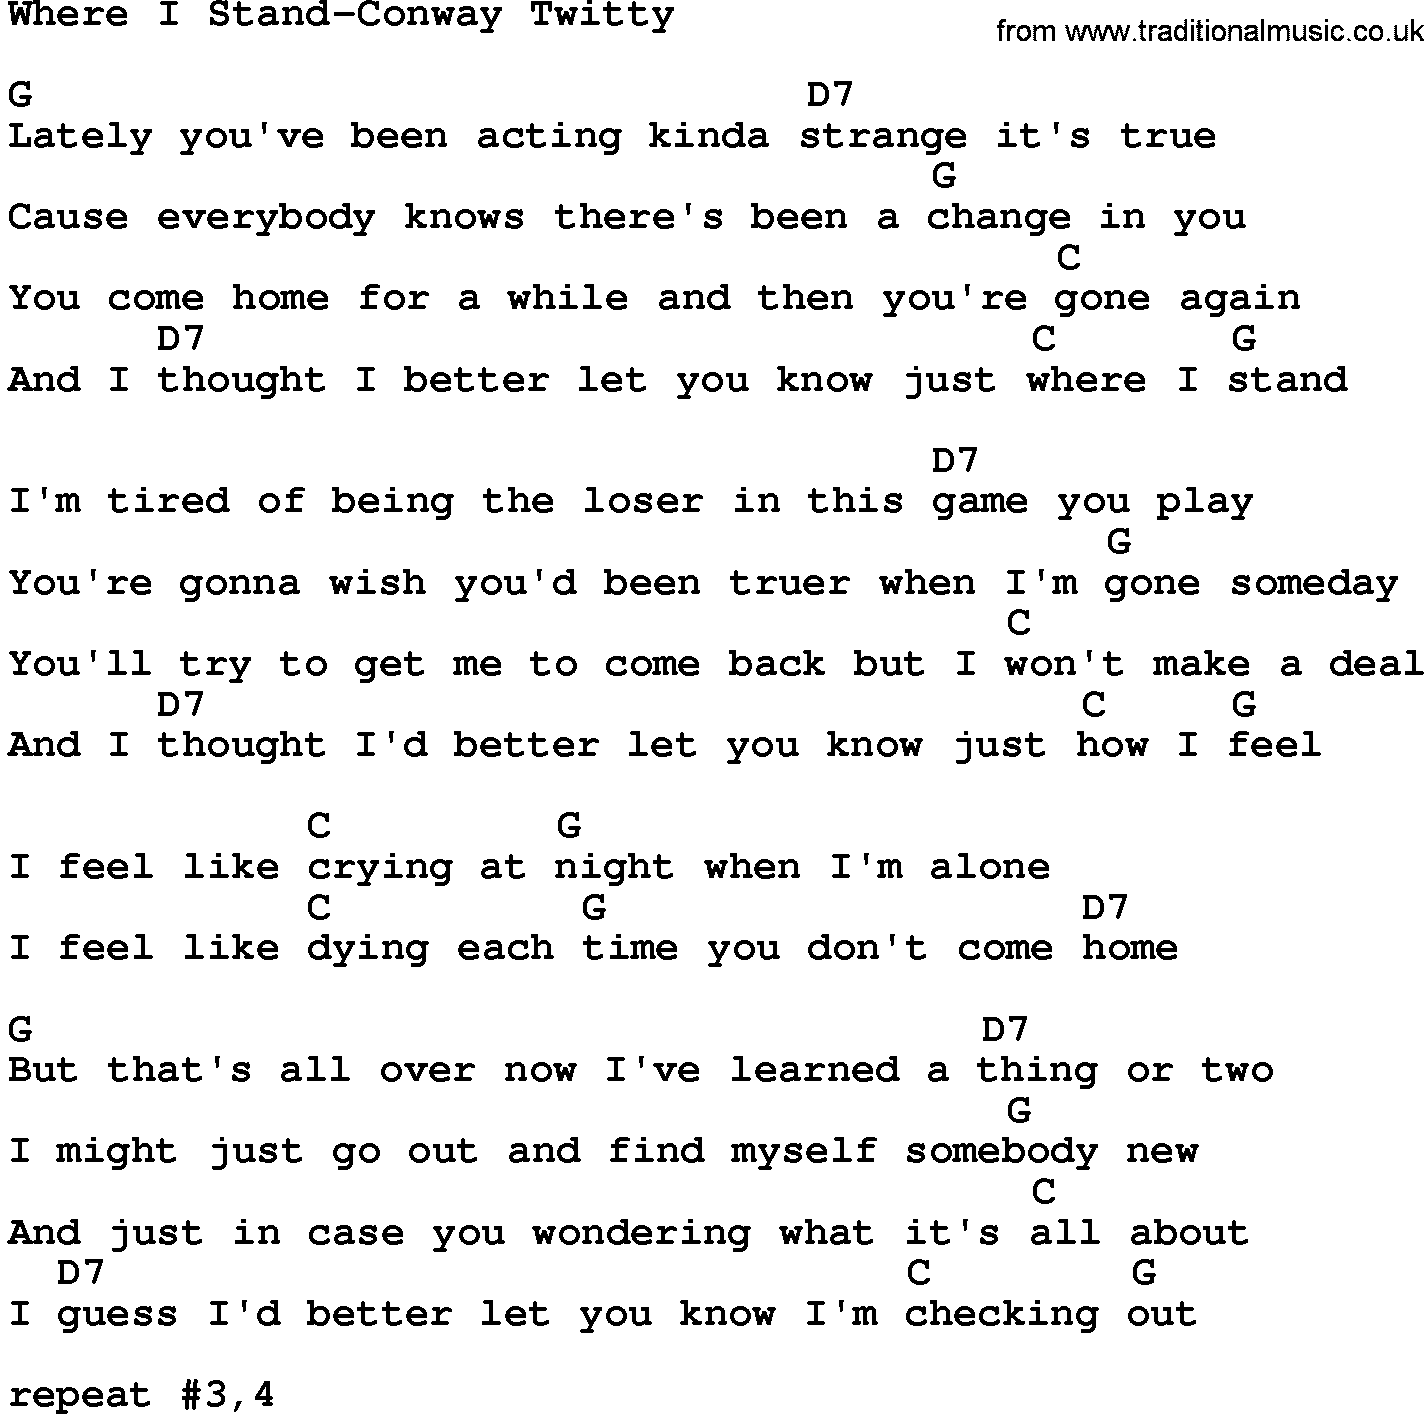 Country music song: Where I Stand-Conway Twitty lyrics and chords